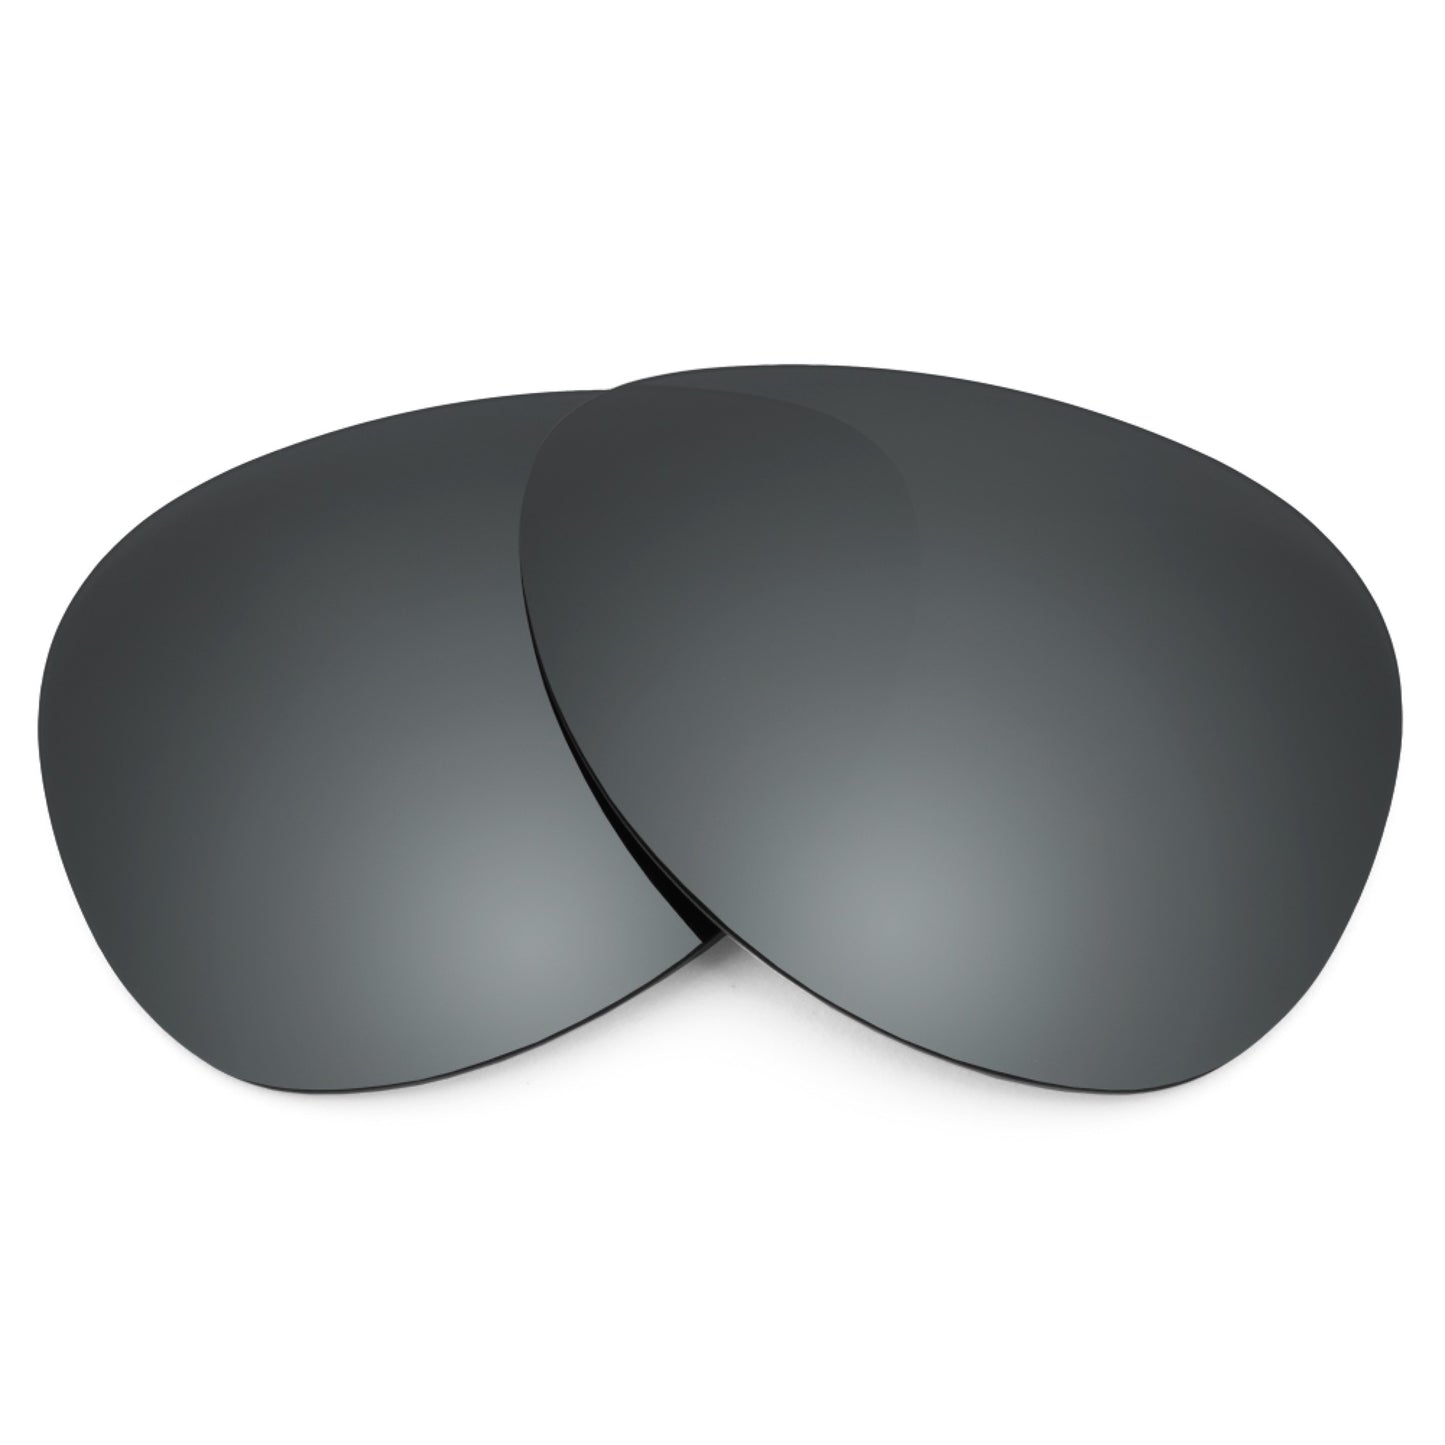 Revant replacement lenses for Ray-Ban Cats 5000 RB4125 59mm Elite Polarized Black Chrome